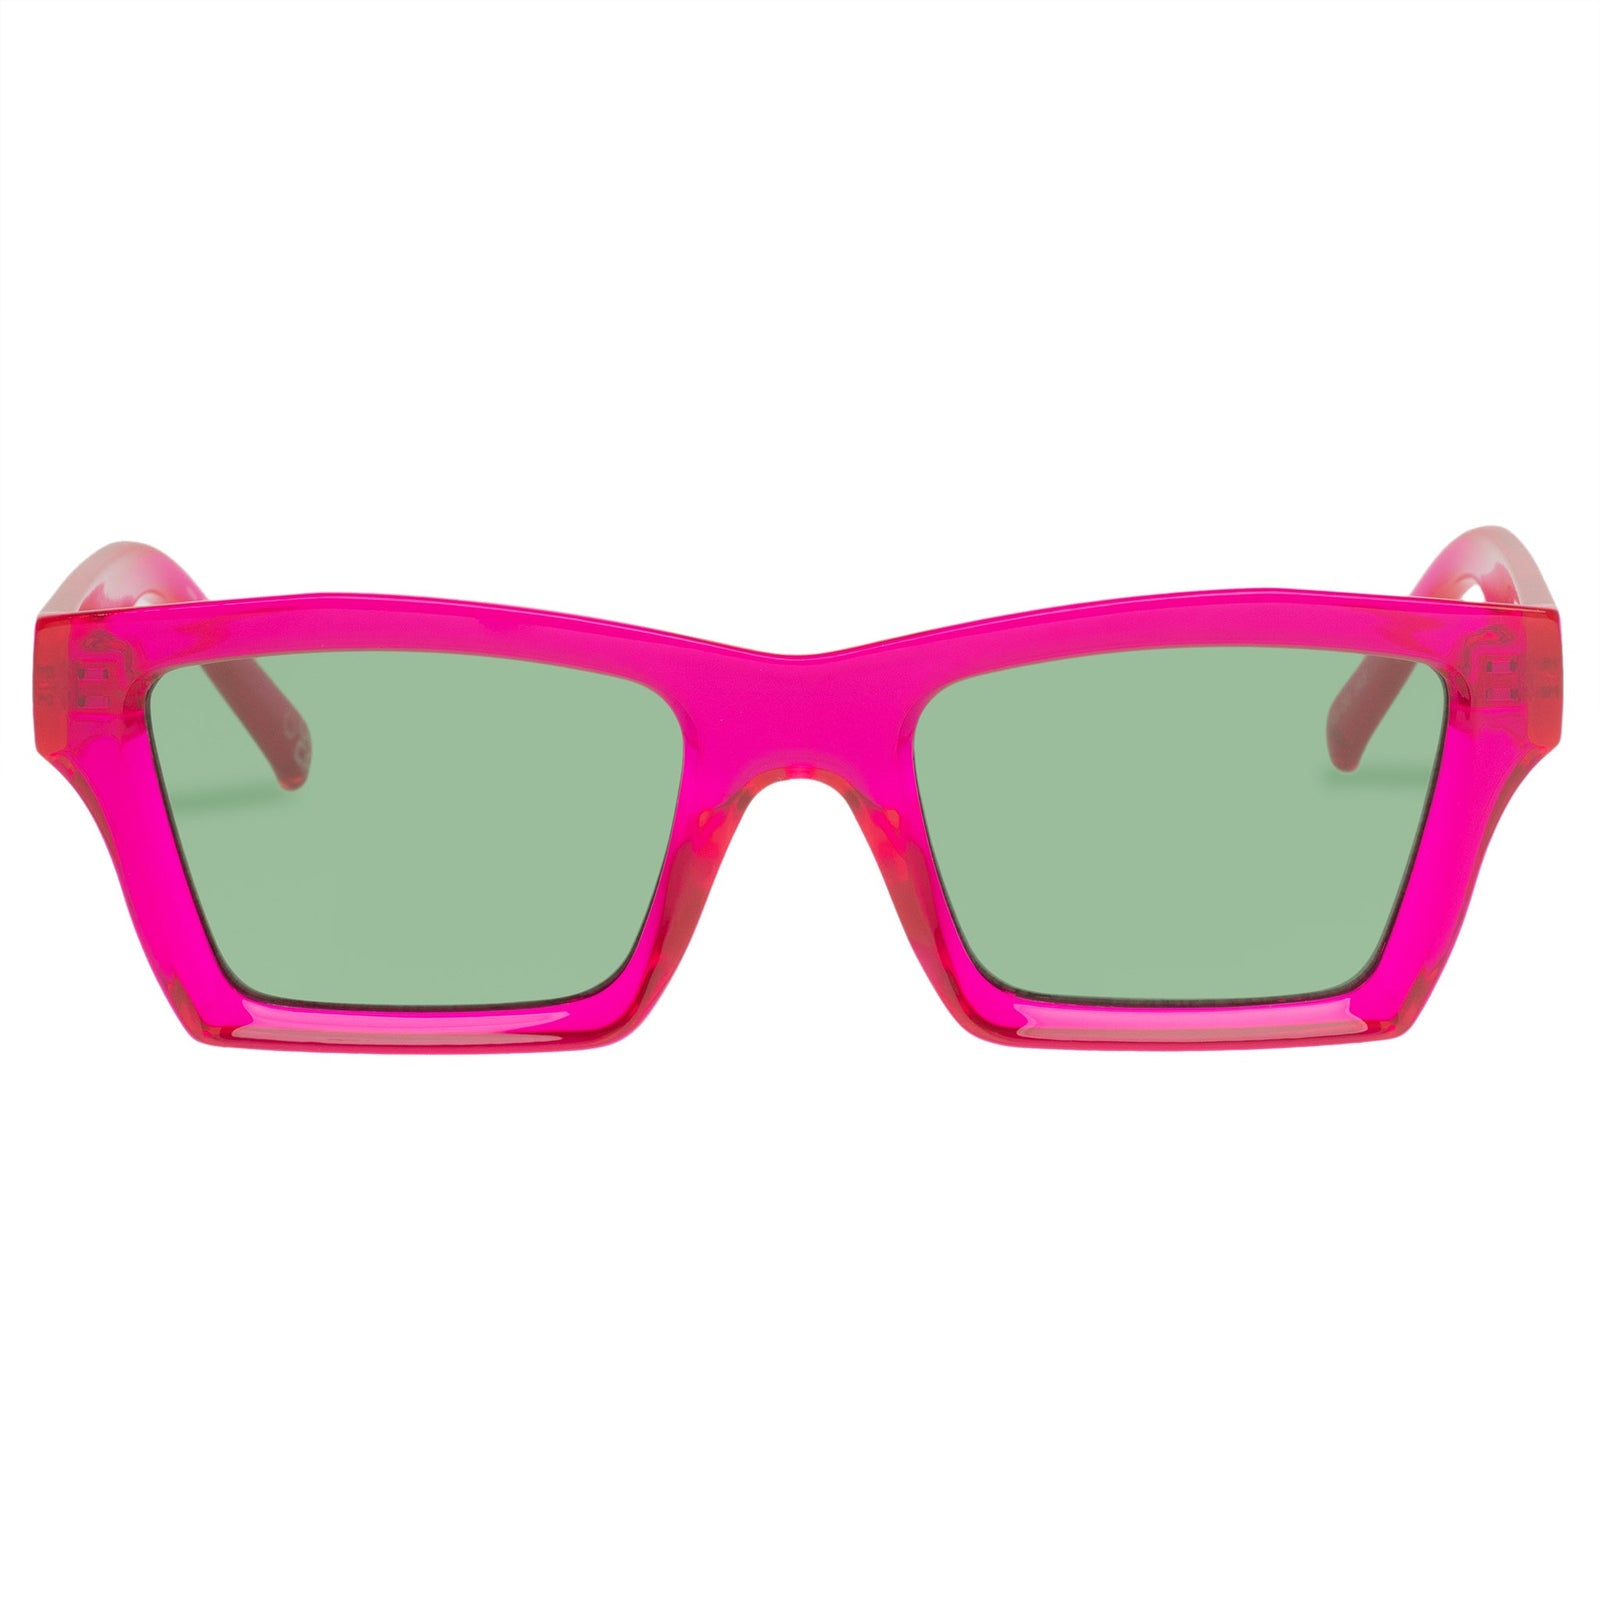 SOMETHING | PINK – Le Specs